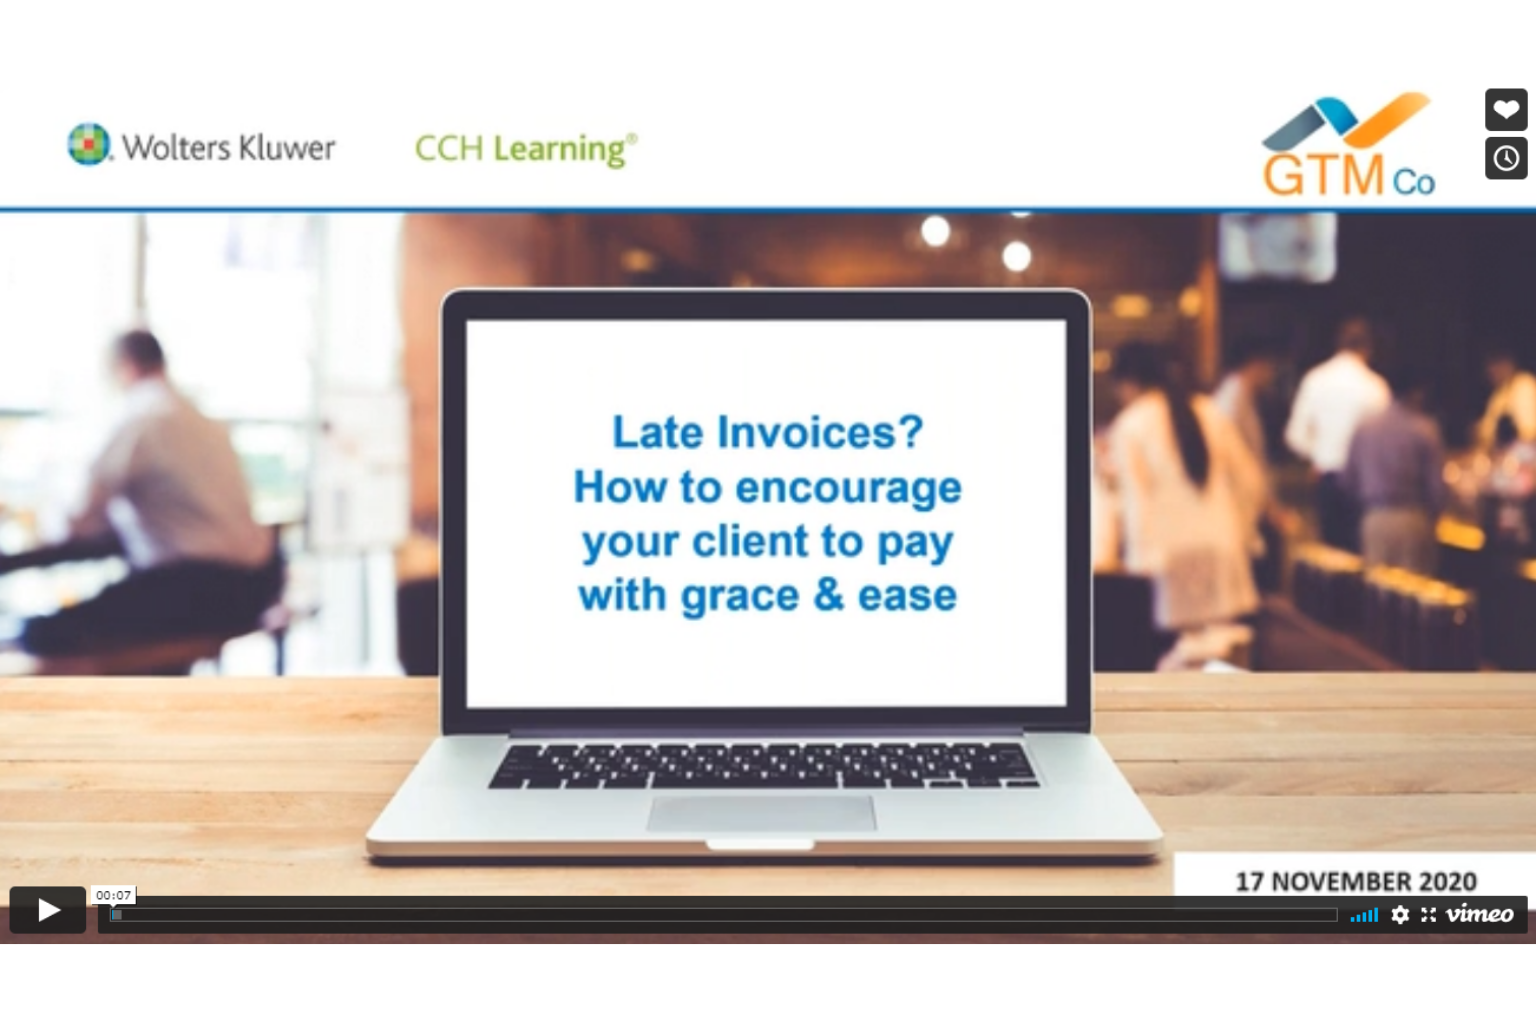 Late Invoices? How to encourage your client to pay with grace and ease